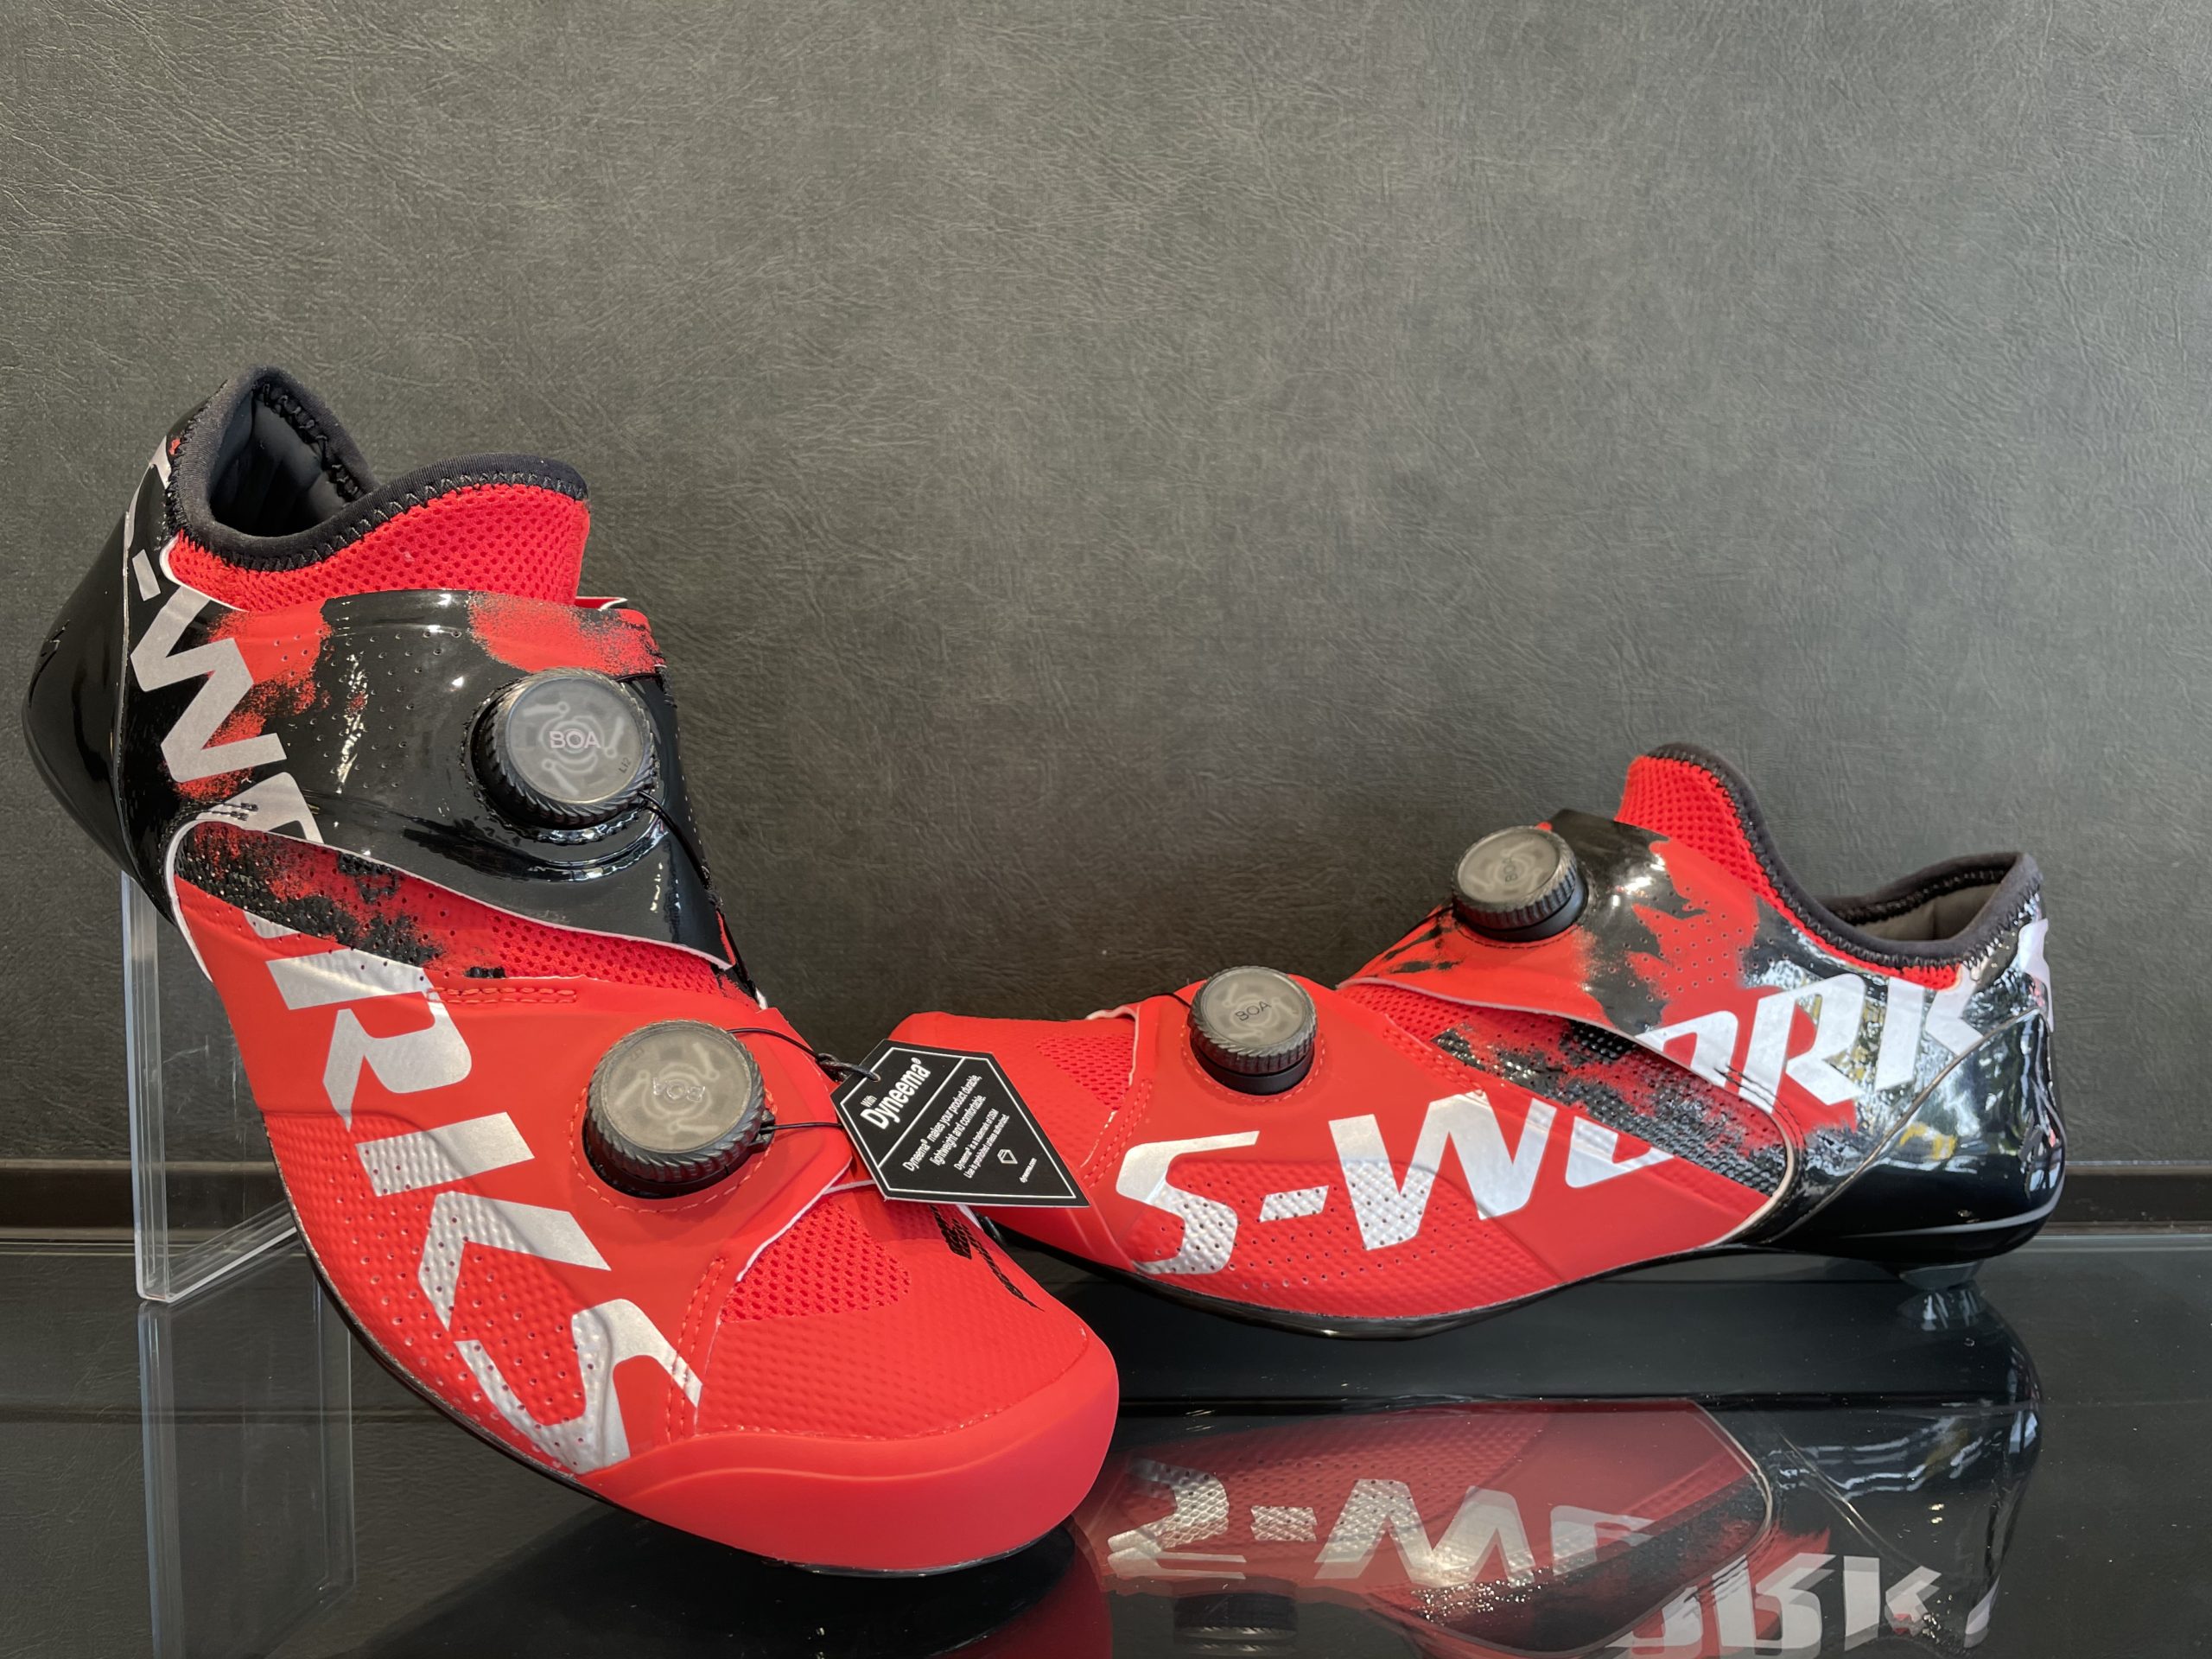 S-WORKS ARES ROAD SHOE 入荷しました❗ | BEACH LINE BICYCLE | 熊本